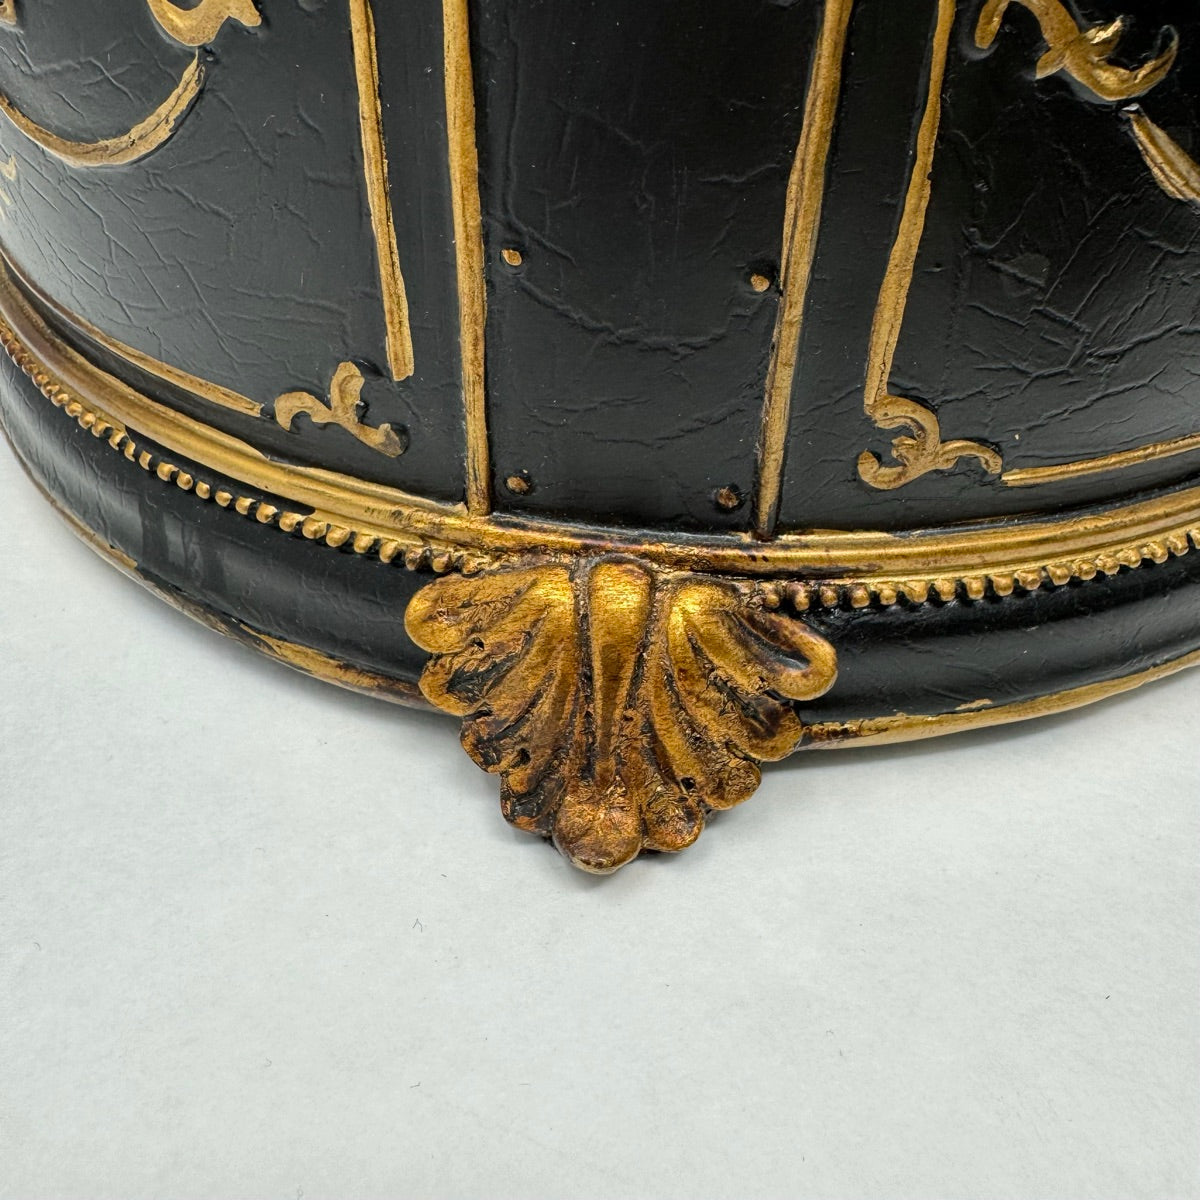 Decorative Box with Lid and Tassel